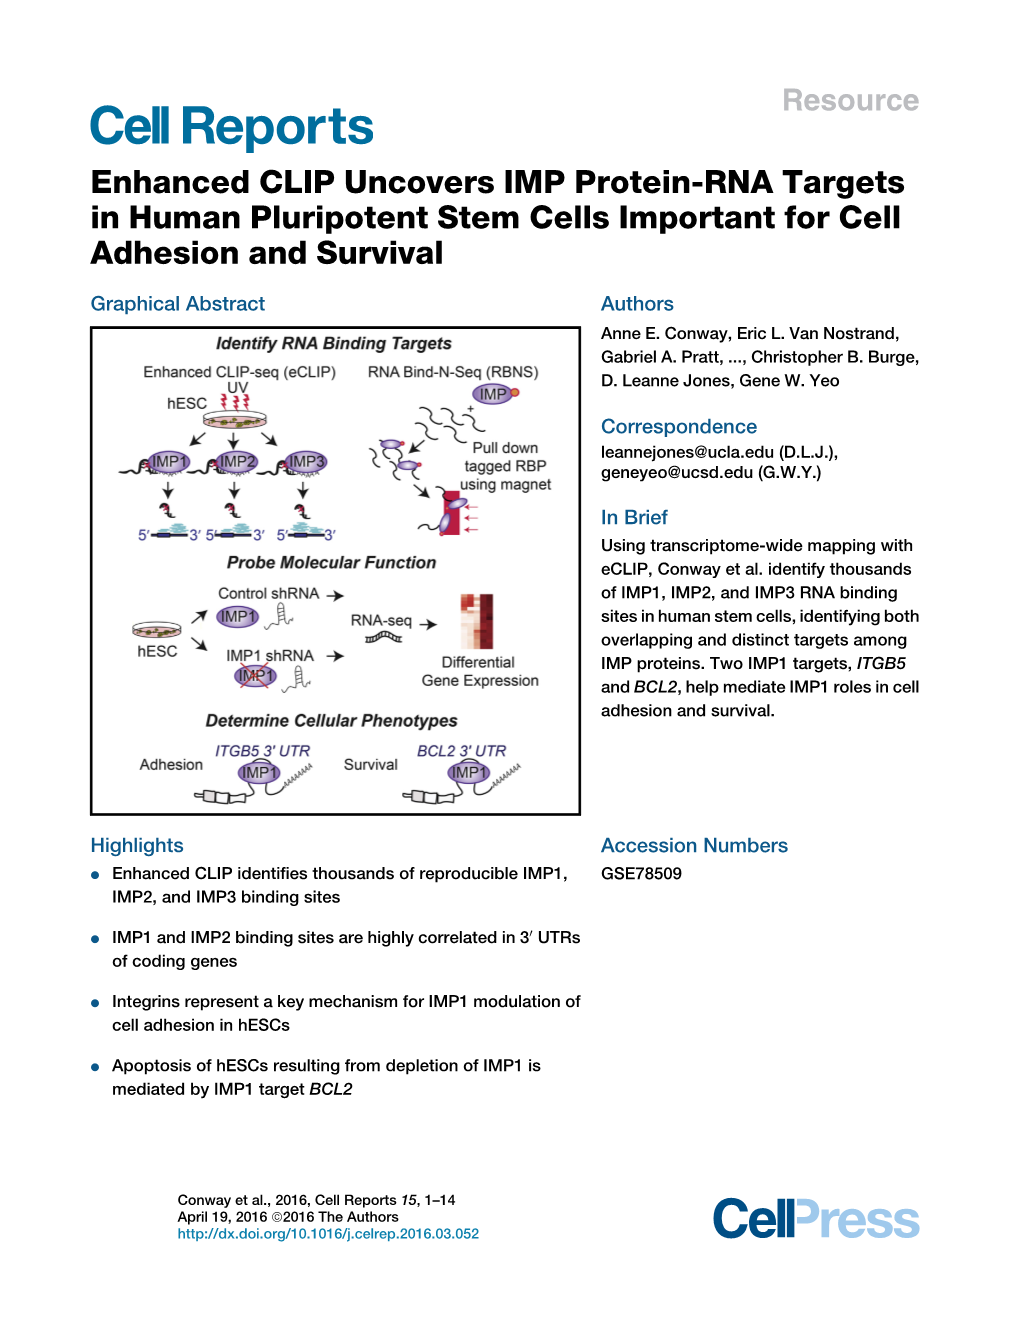 Enhanced CLIP Uncovers IMP Protein-RNA Targets in Human Pluripotent Stem Cells Important for Cell Adhesion and Survival